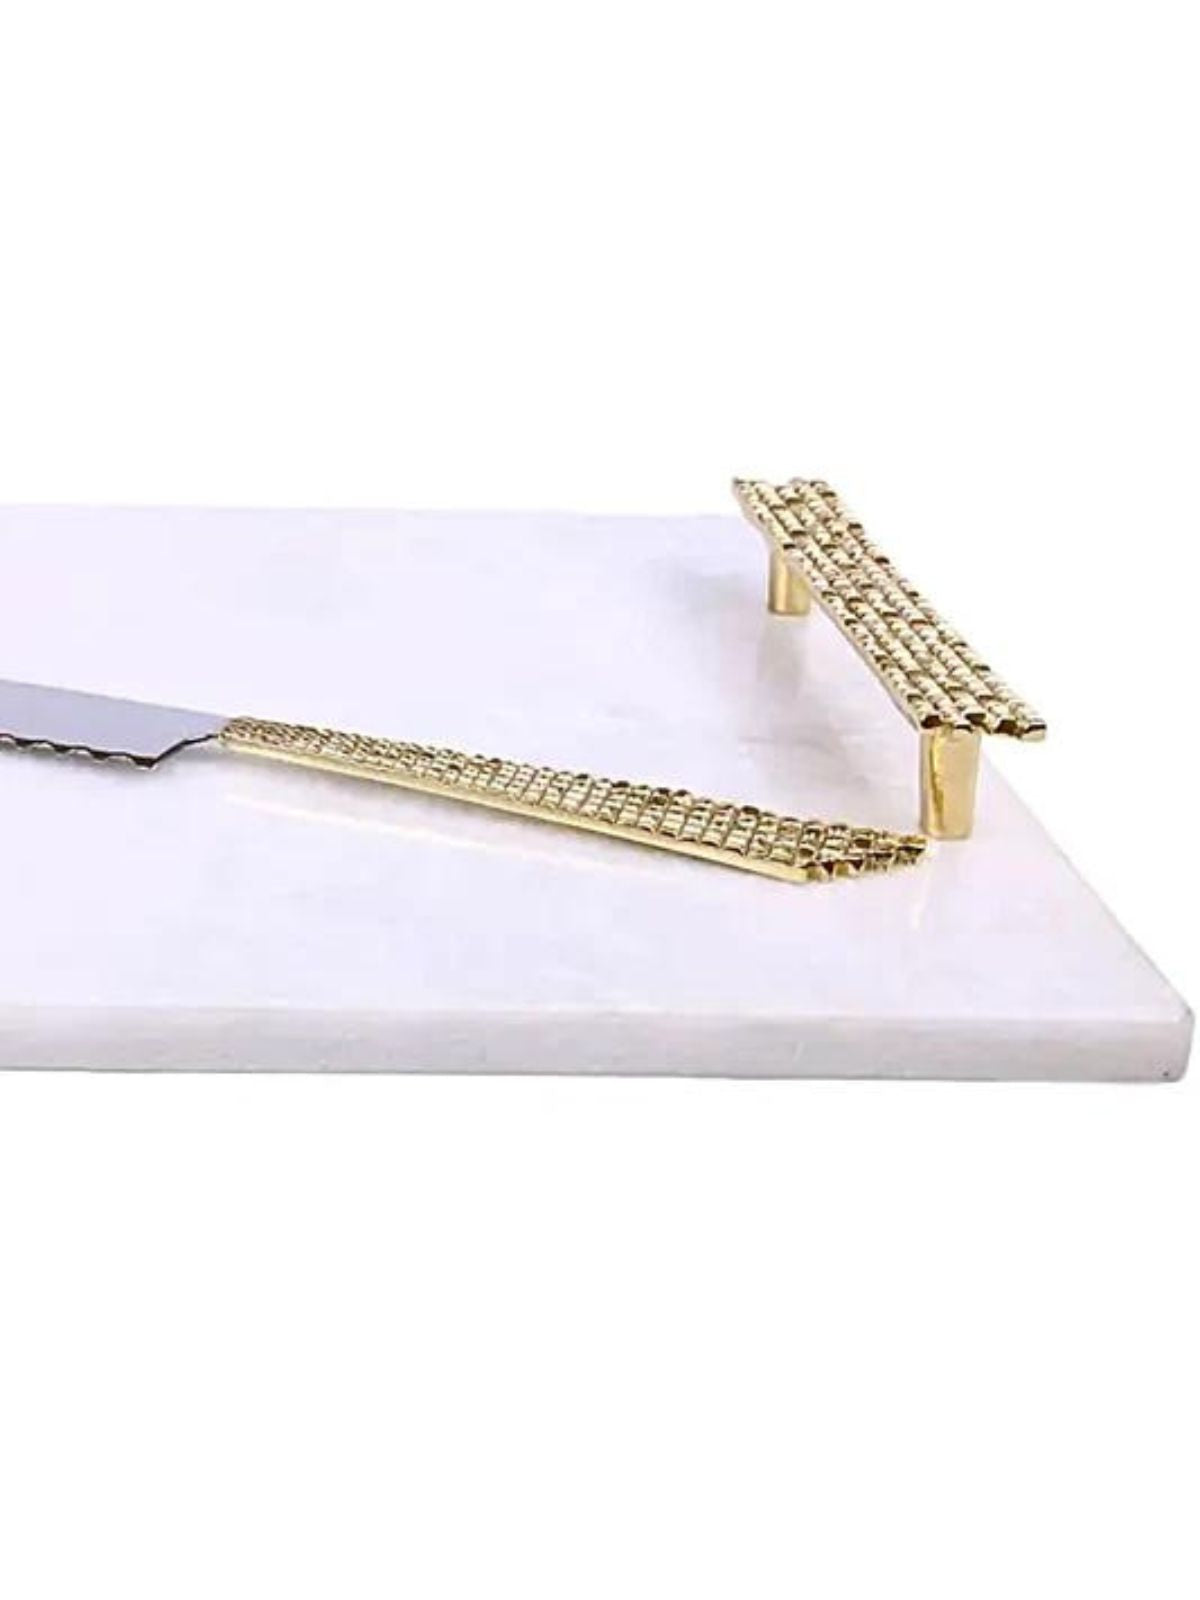 Luxurious White Marble Tray with Gold Mosaic Designed Handles and Stainless Steel Knife, Sold by KYA Home Decor.